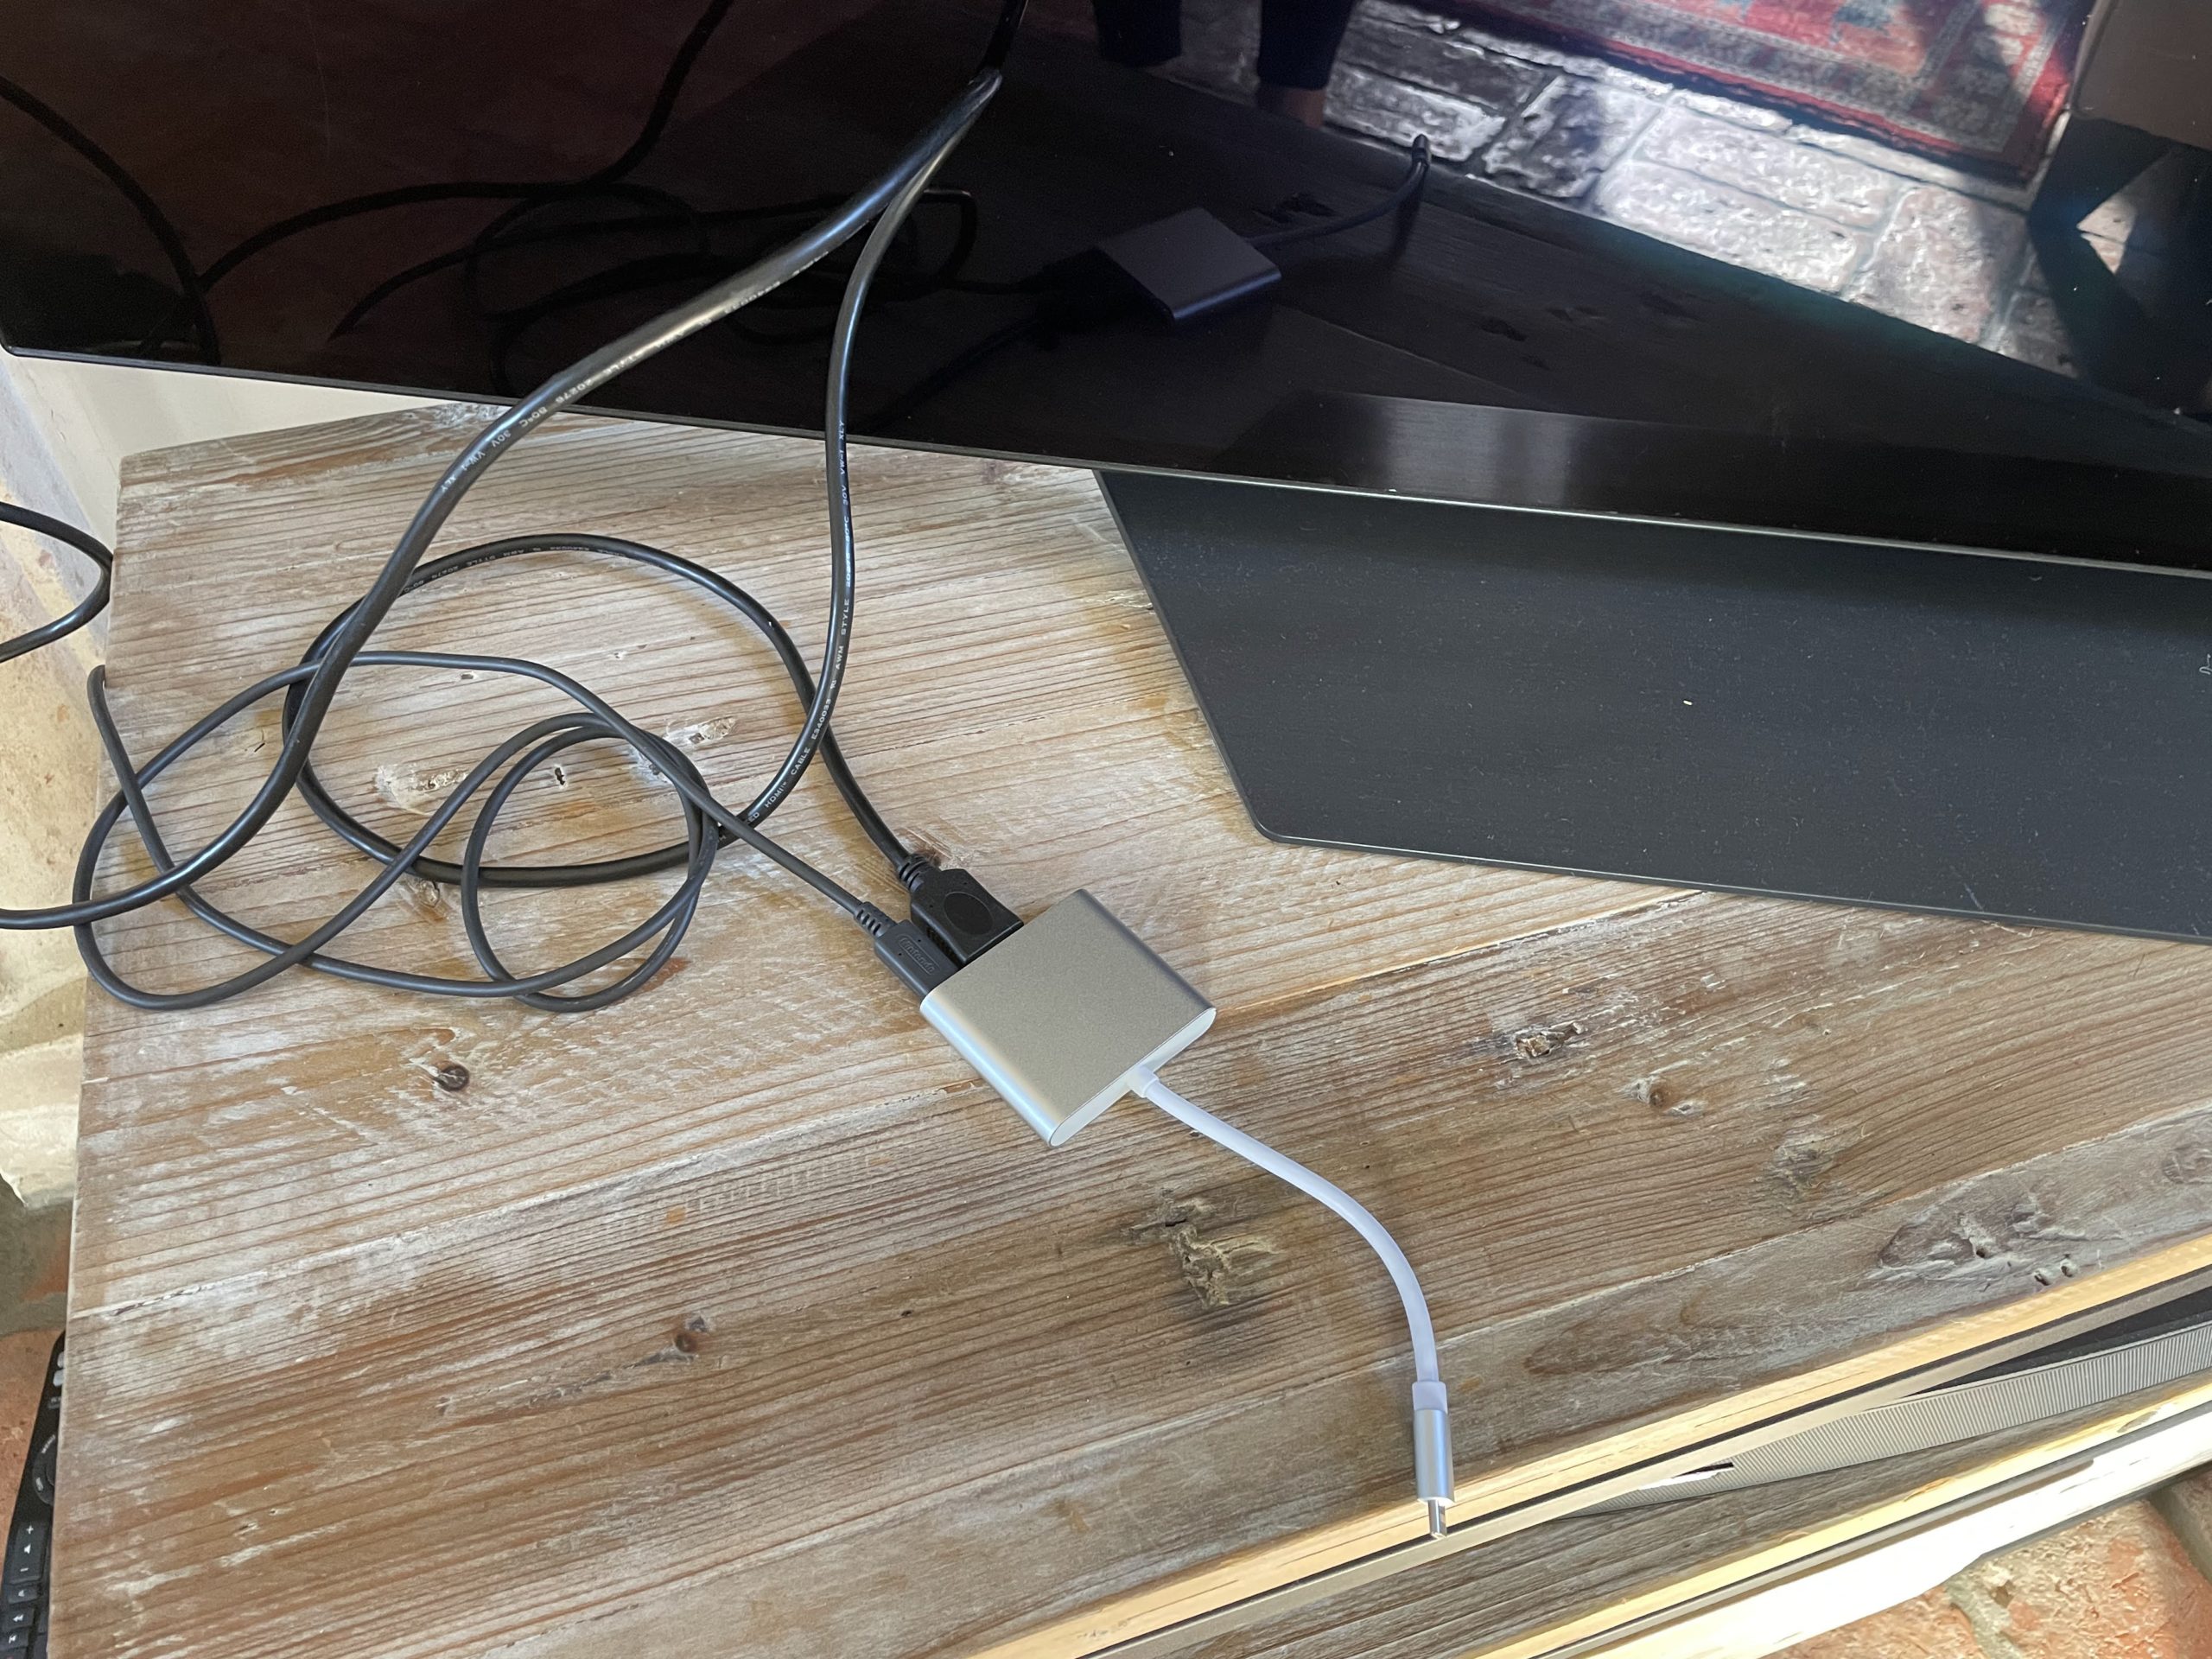 How To Connect/Charge Nintendo Switch Without A Dock?